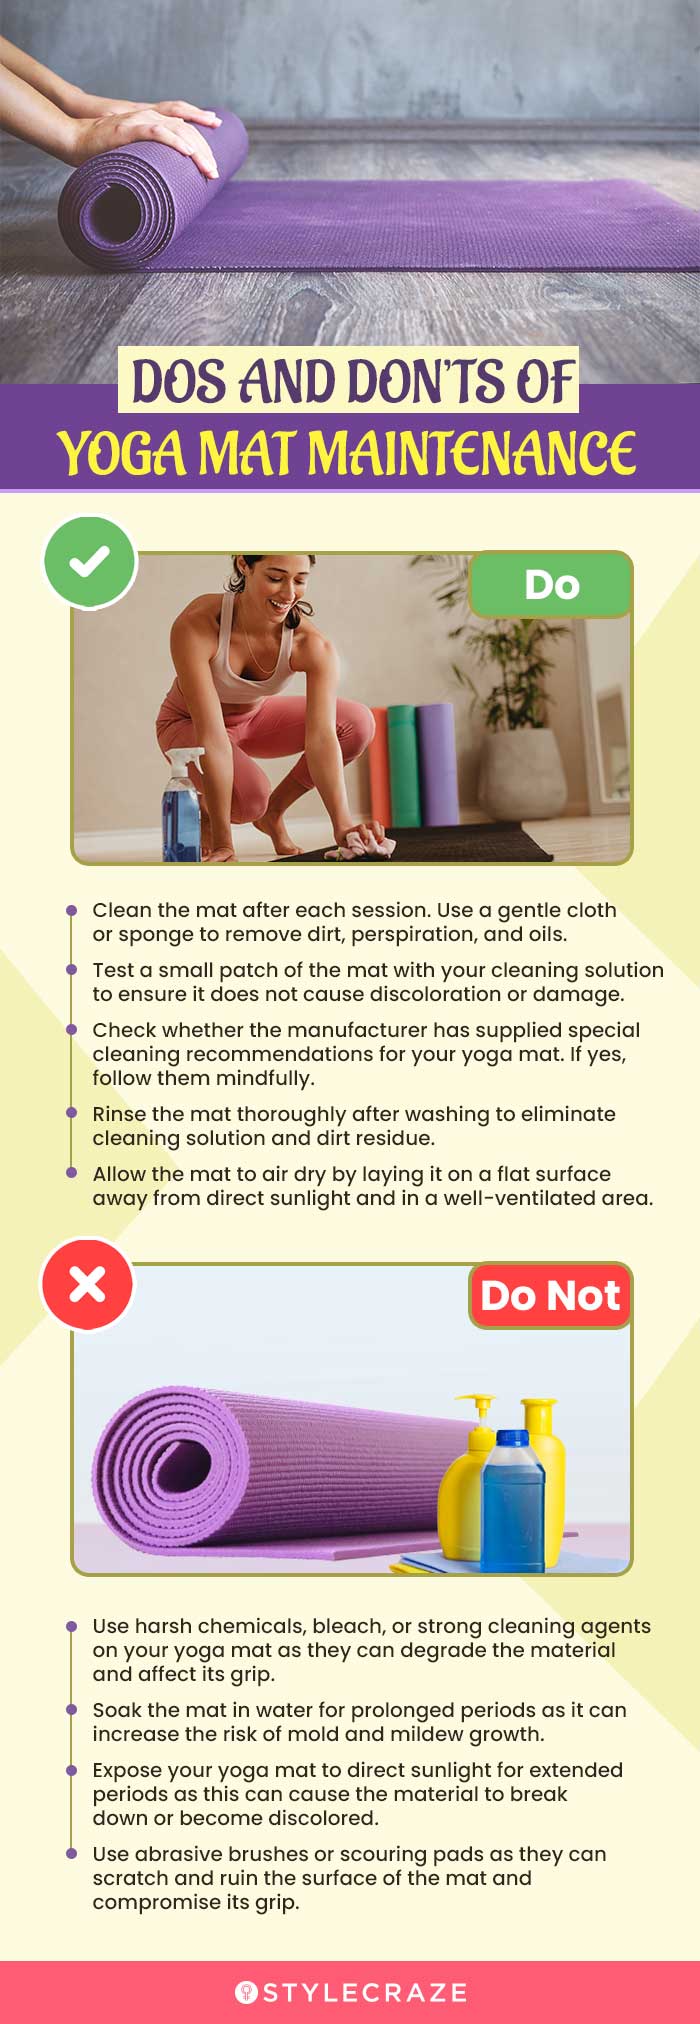 Dos And Don’ts Of Yoga Mat Maintenance (infographic)